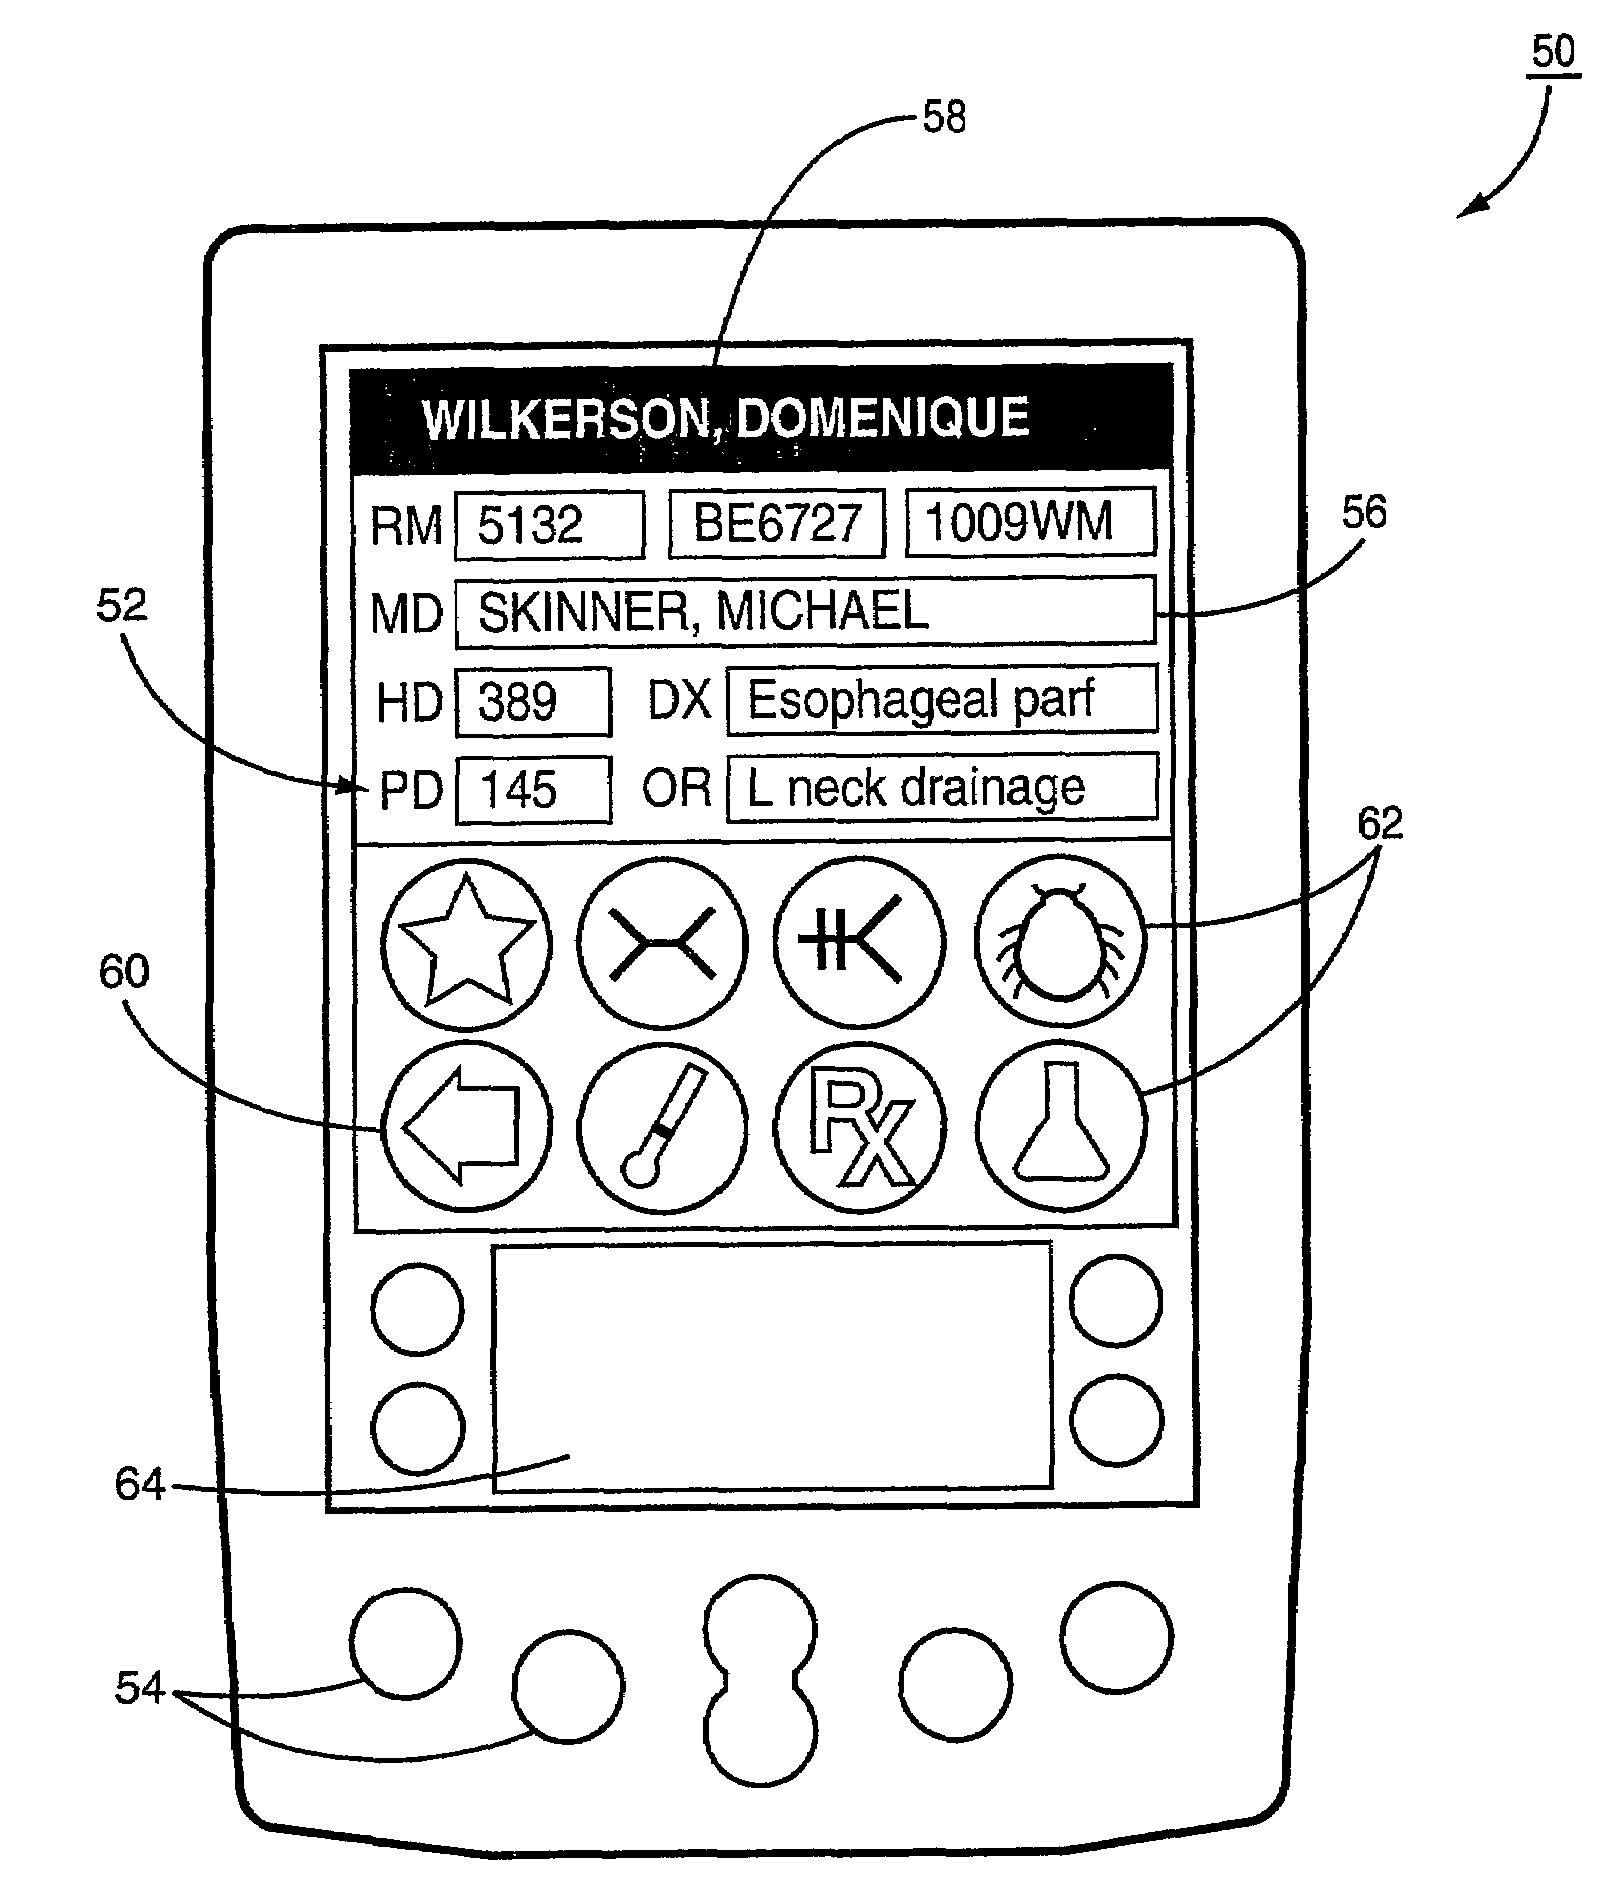 Method and system for extracting medical information for presentation to medical providers on mobile terminals